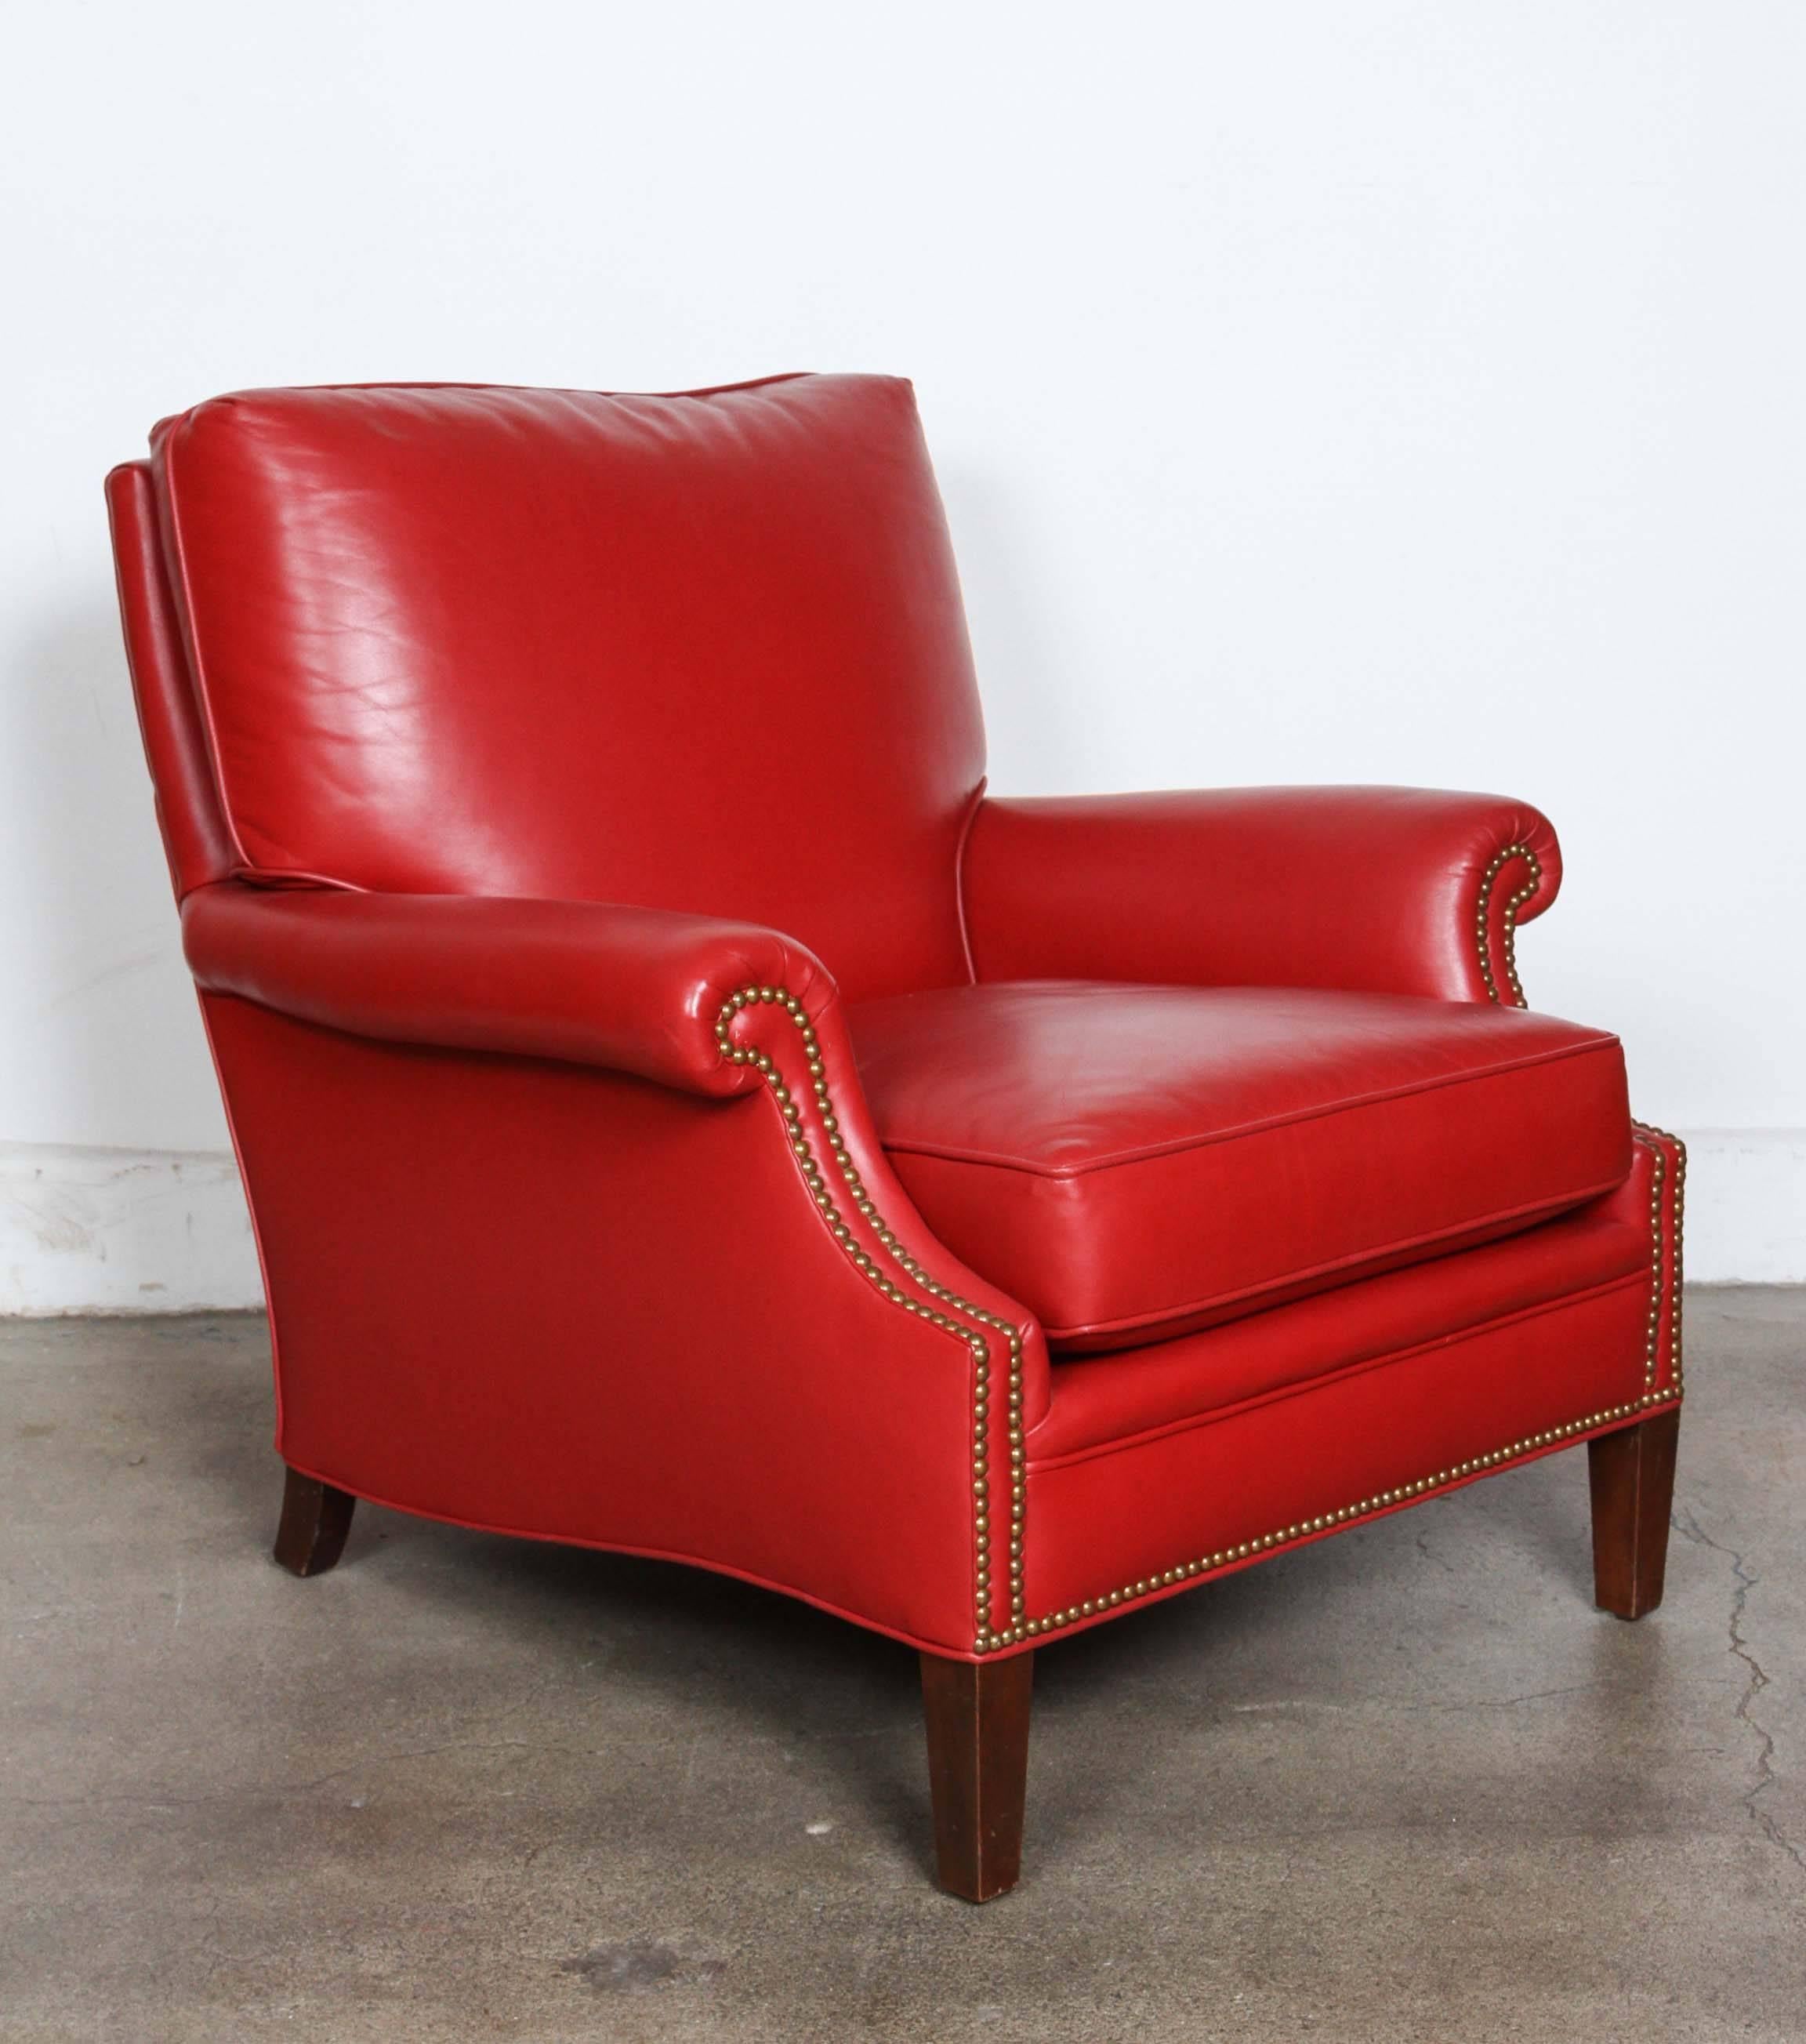 Pair of club leather lounge chairs In a deep Moroccan red leather, very comfortable.
Brass nailhead studded in front and back, loose cushion seat.
Hot Moroccan red armchairs with the elegant French European look.
Great library club lounge chairs.